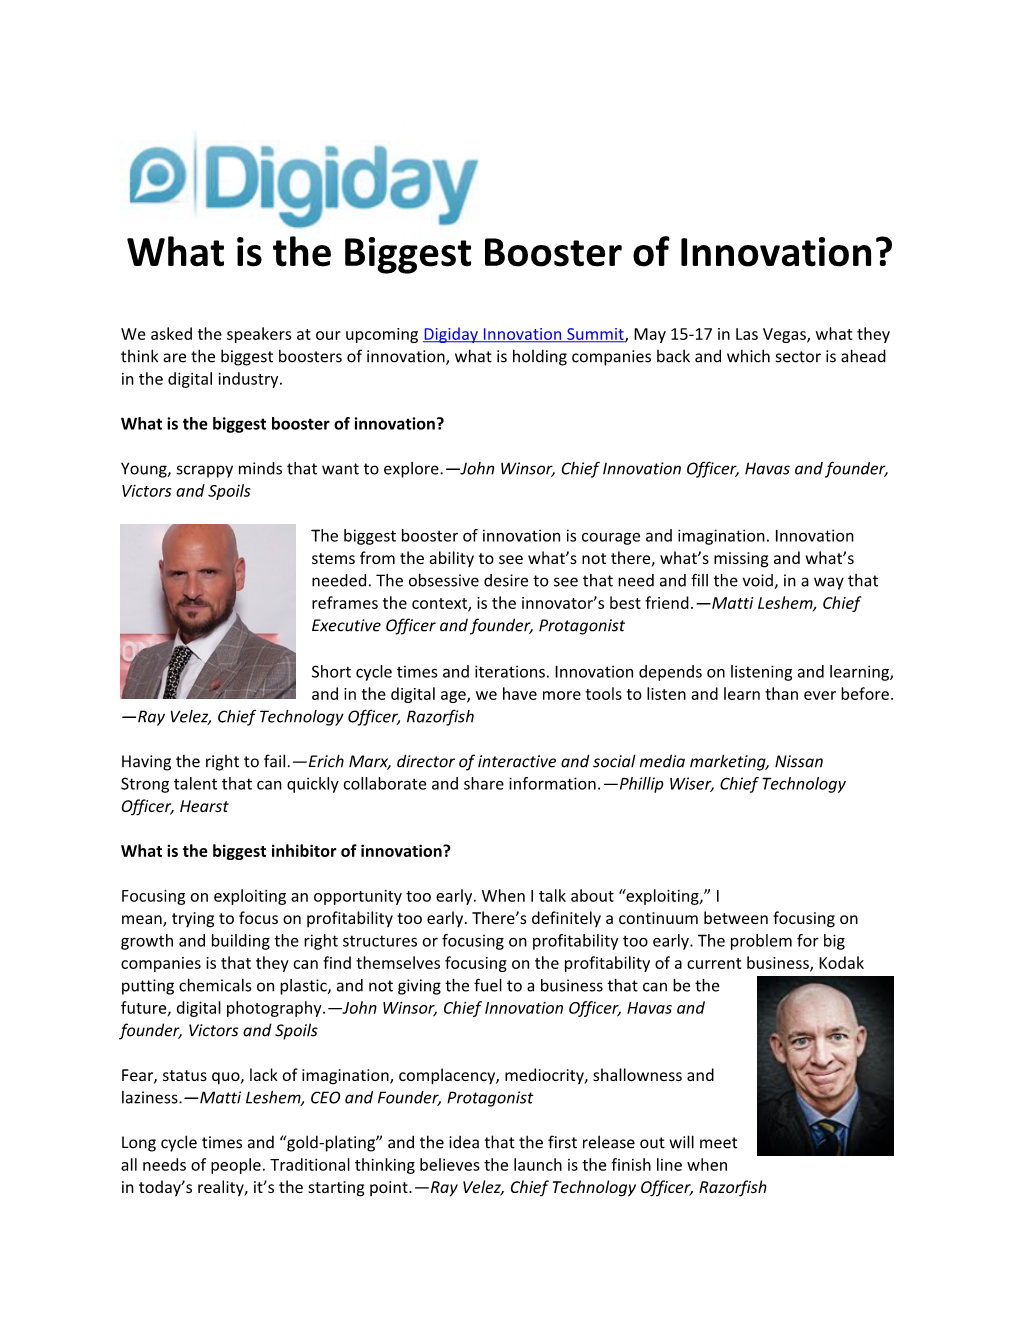 What Is the Biggest Booster of Innovation?